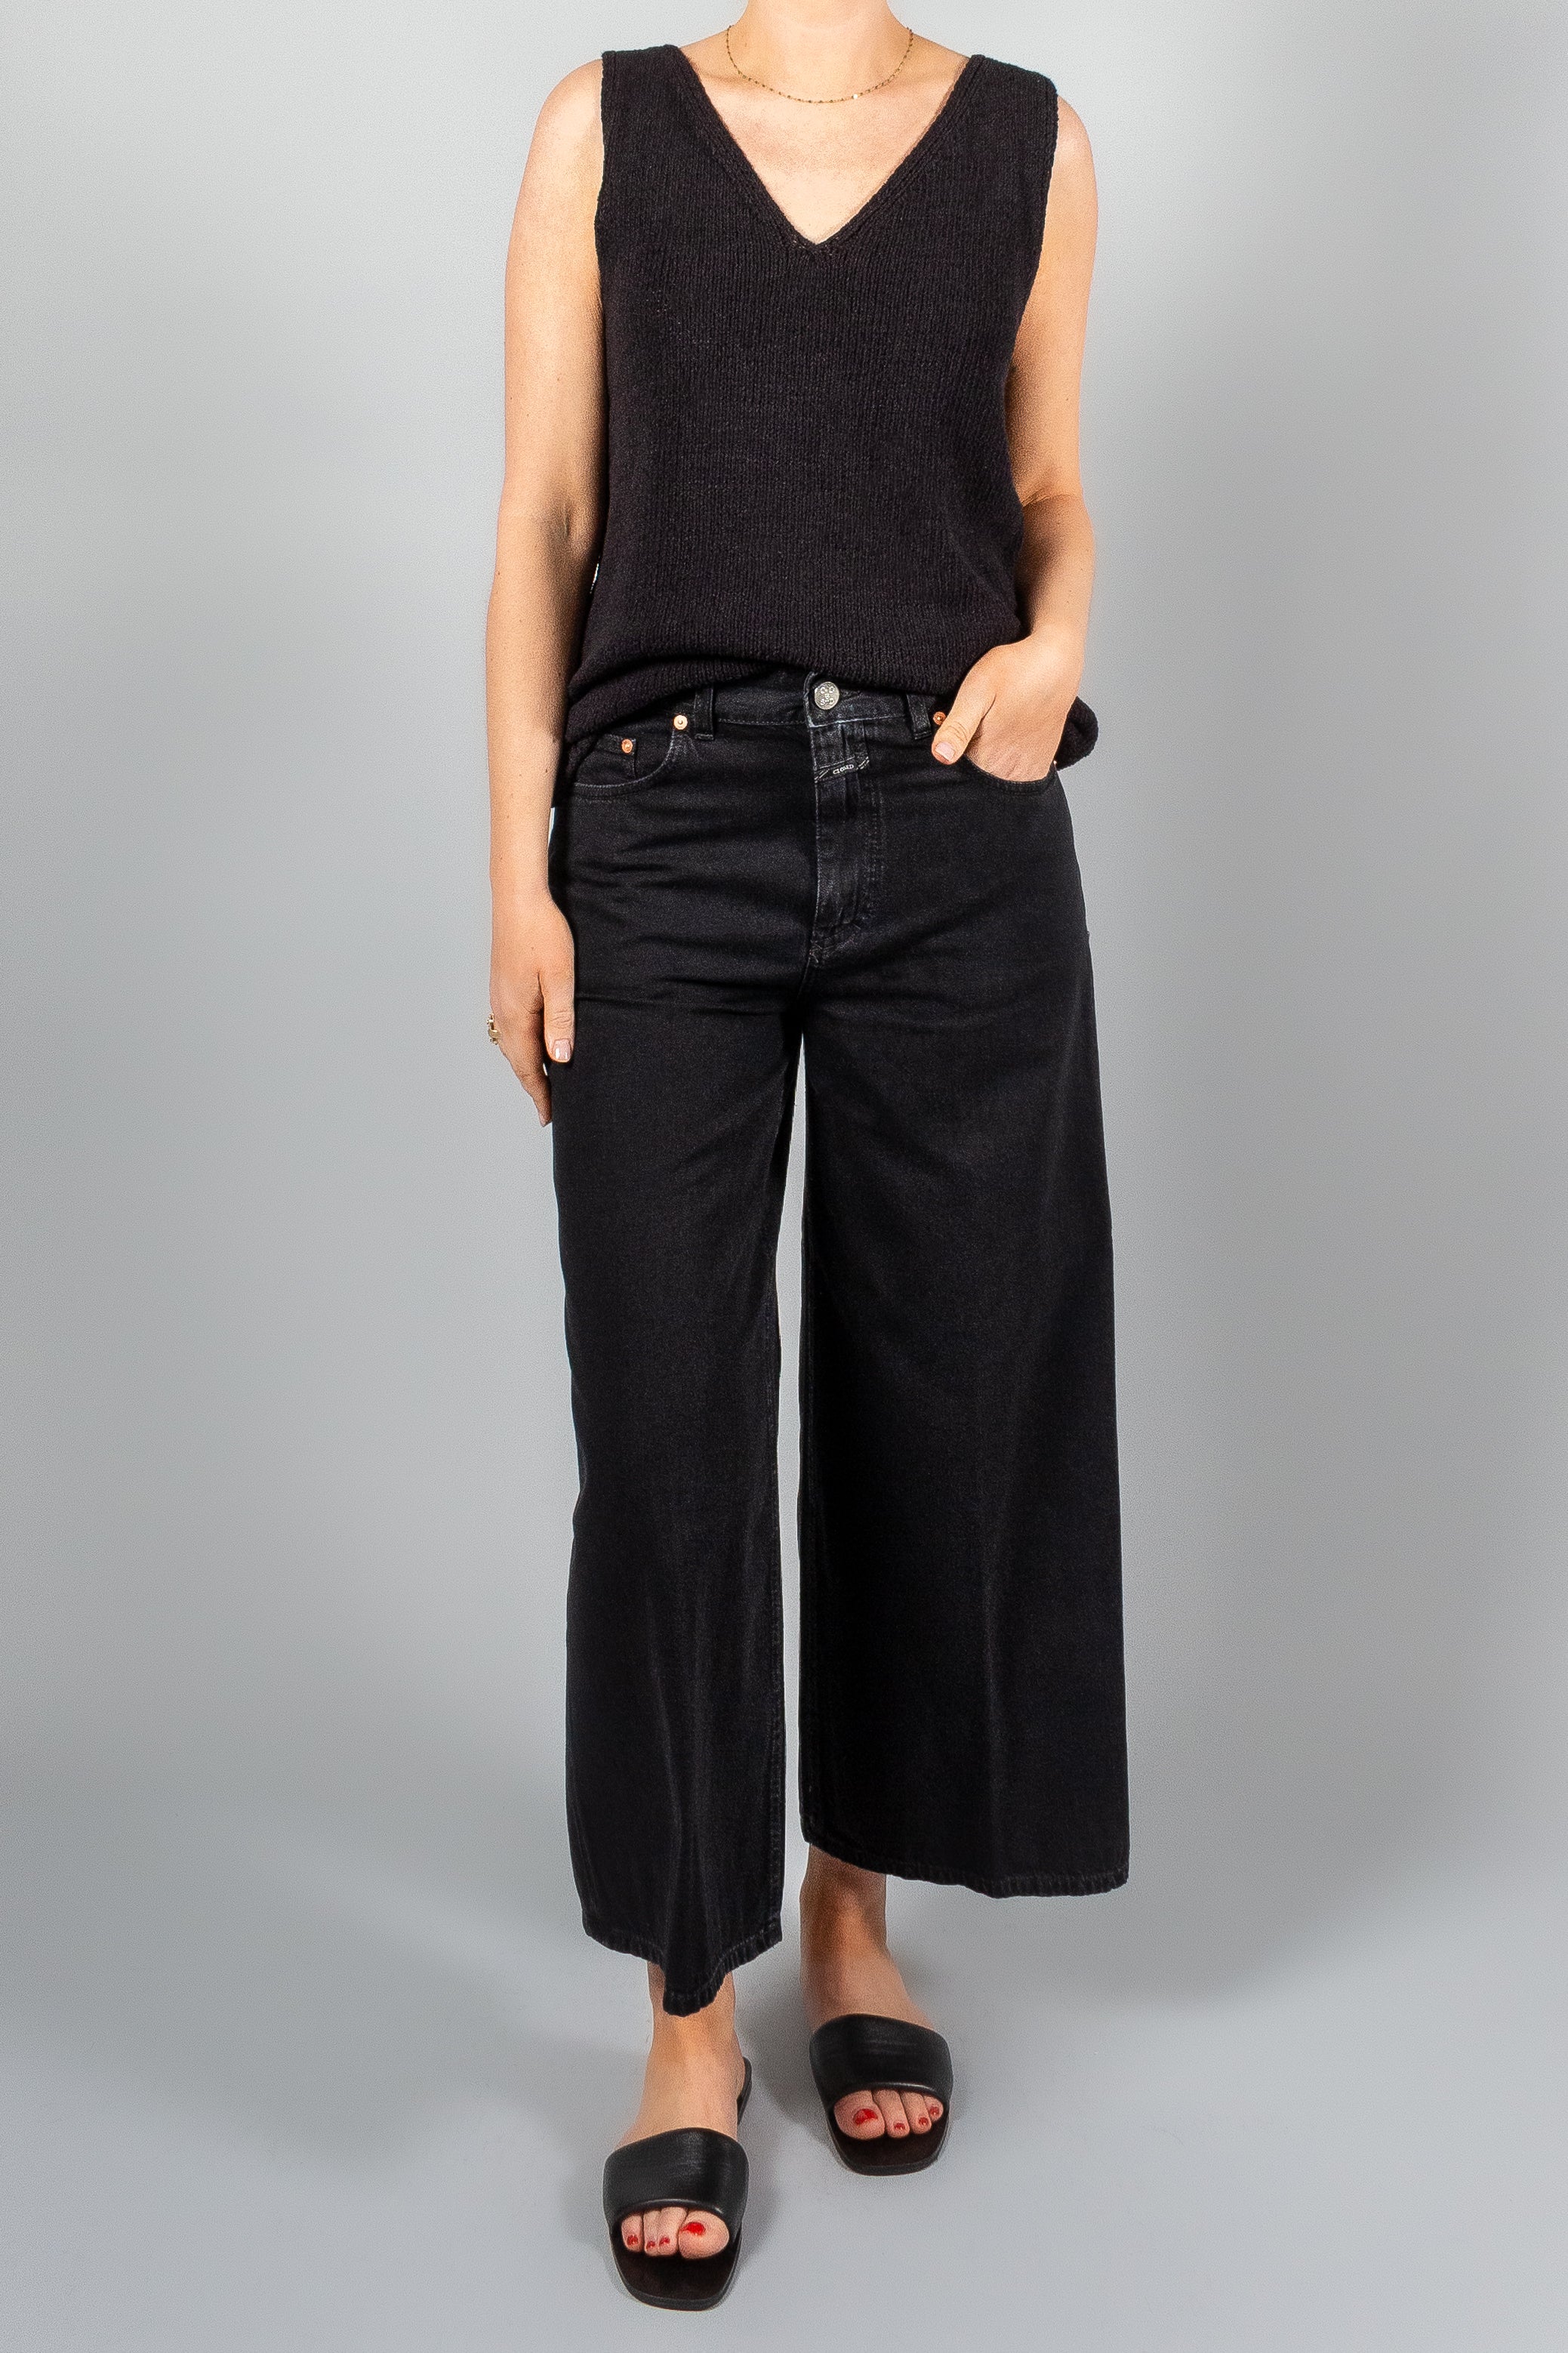 Closed Lyna Denim-Pants and Shorts-Misch-Boutique-Vancouver-Canada-misch.ca